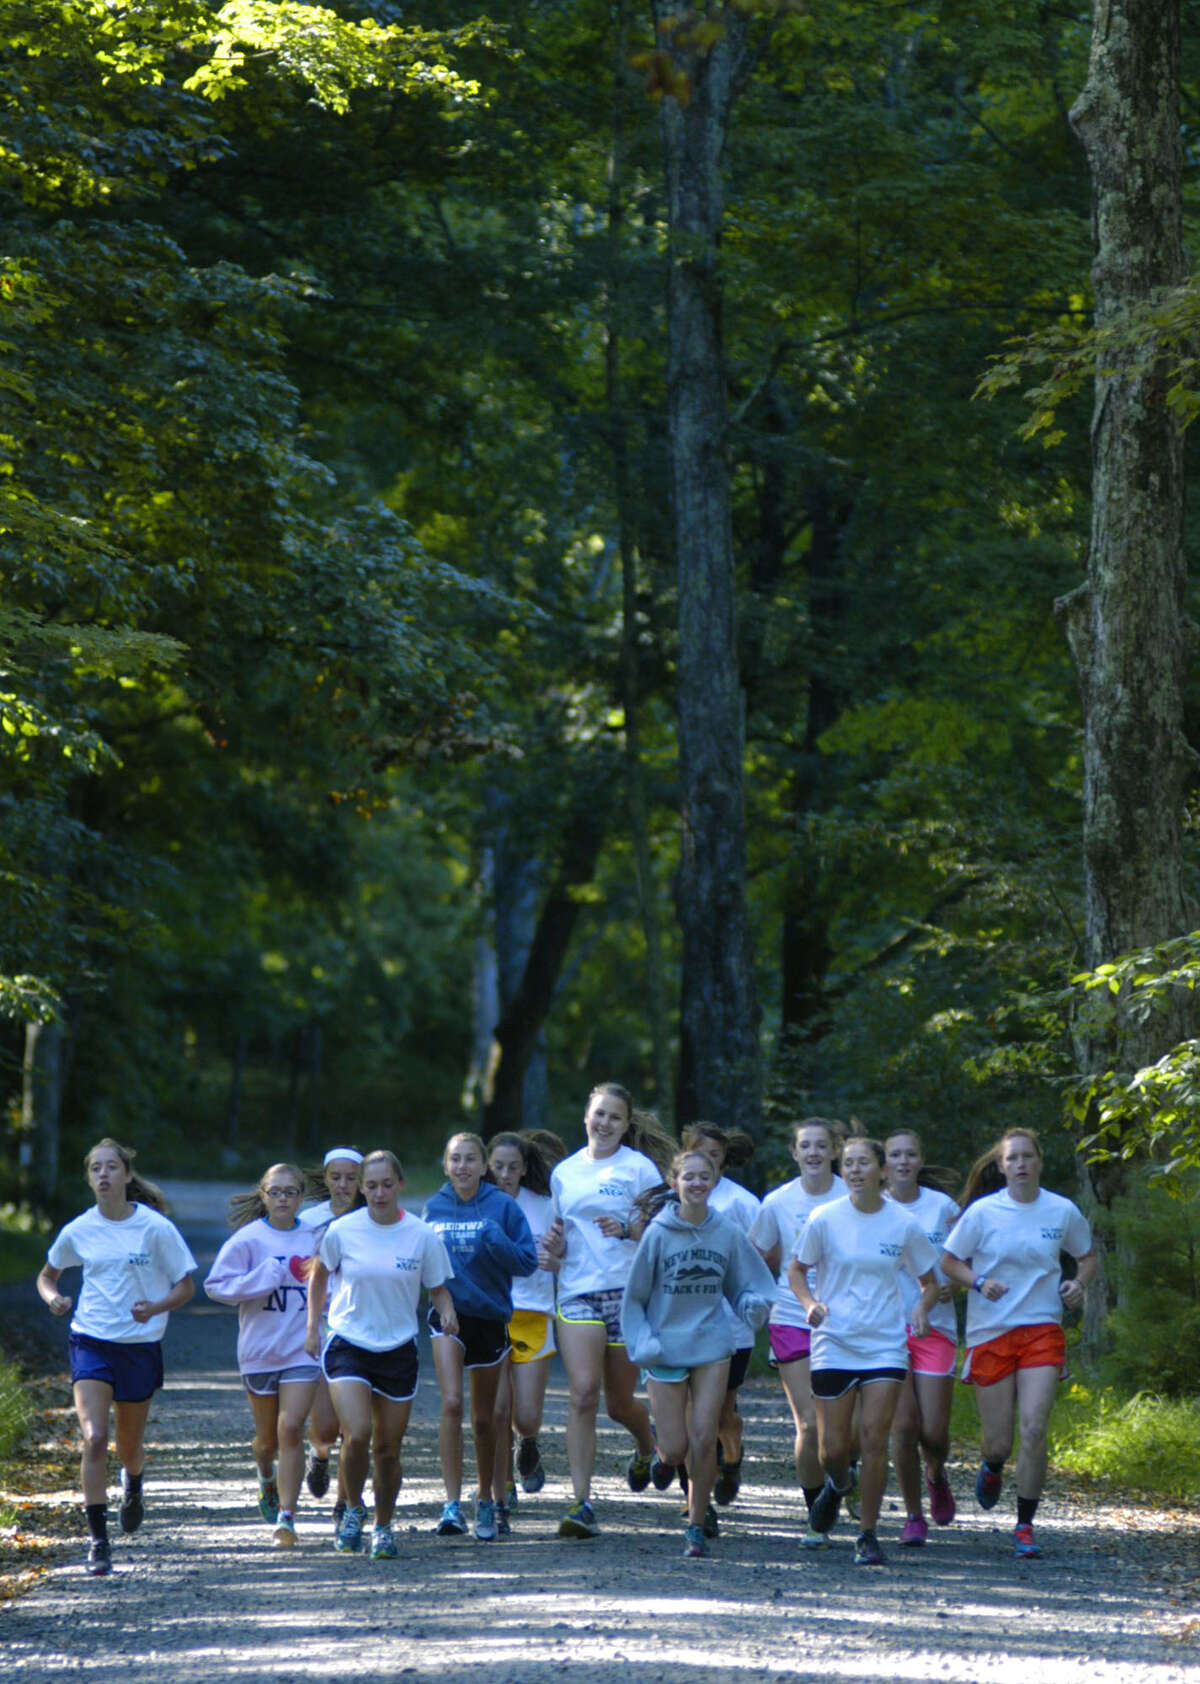 The Green Wave runners enjoy a light warmup run at Steep Rock Reservation in Washington before engaging in a tough workout for the New Milford High School girls' cross country season. September 2013